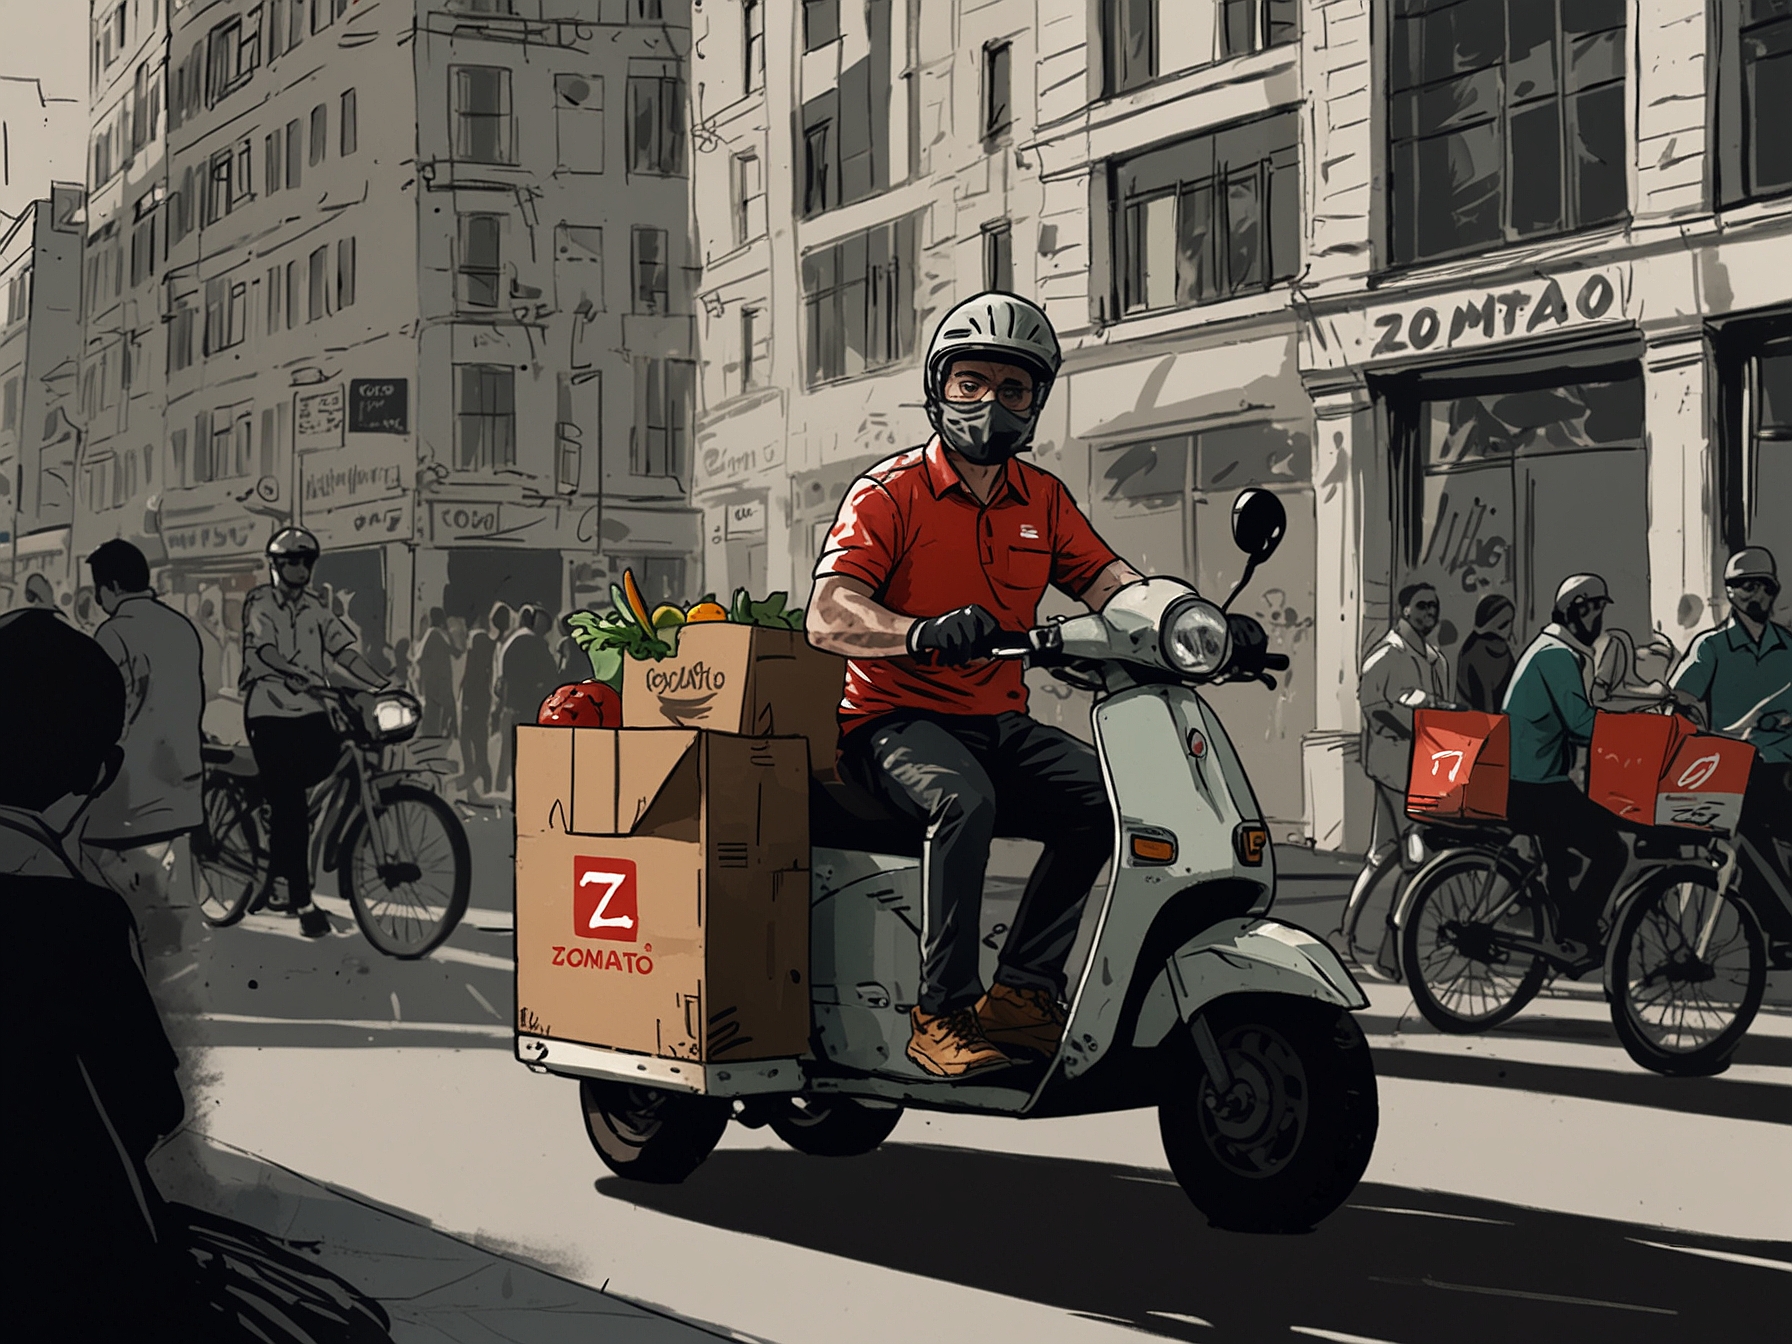 An image illustrating Zomato's diverse business operations including food delivery and events.